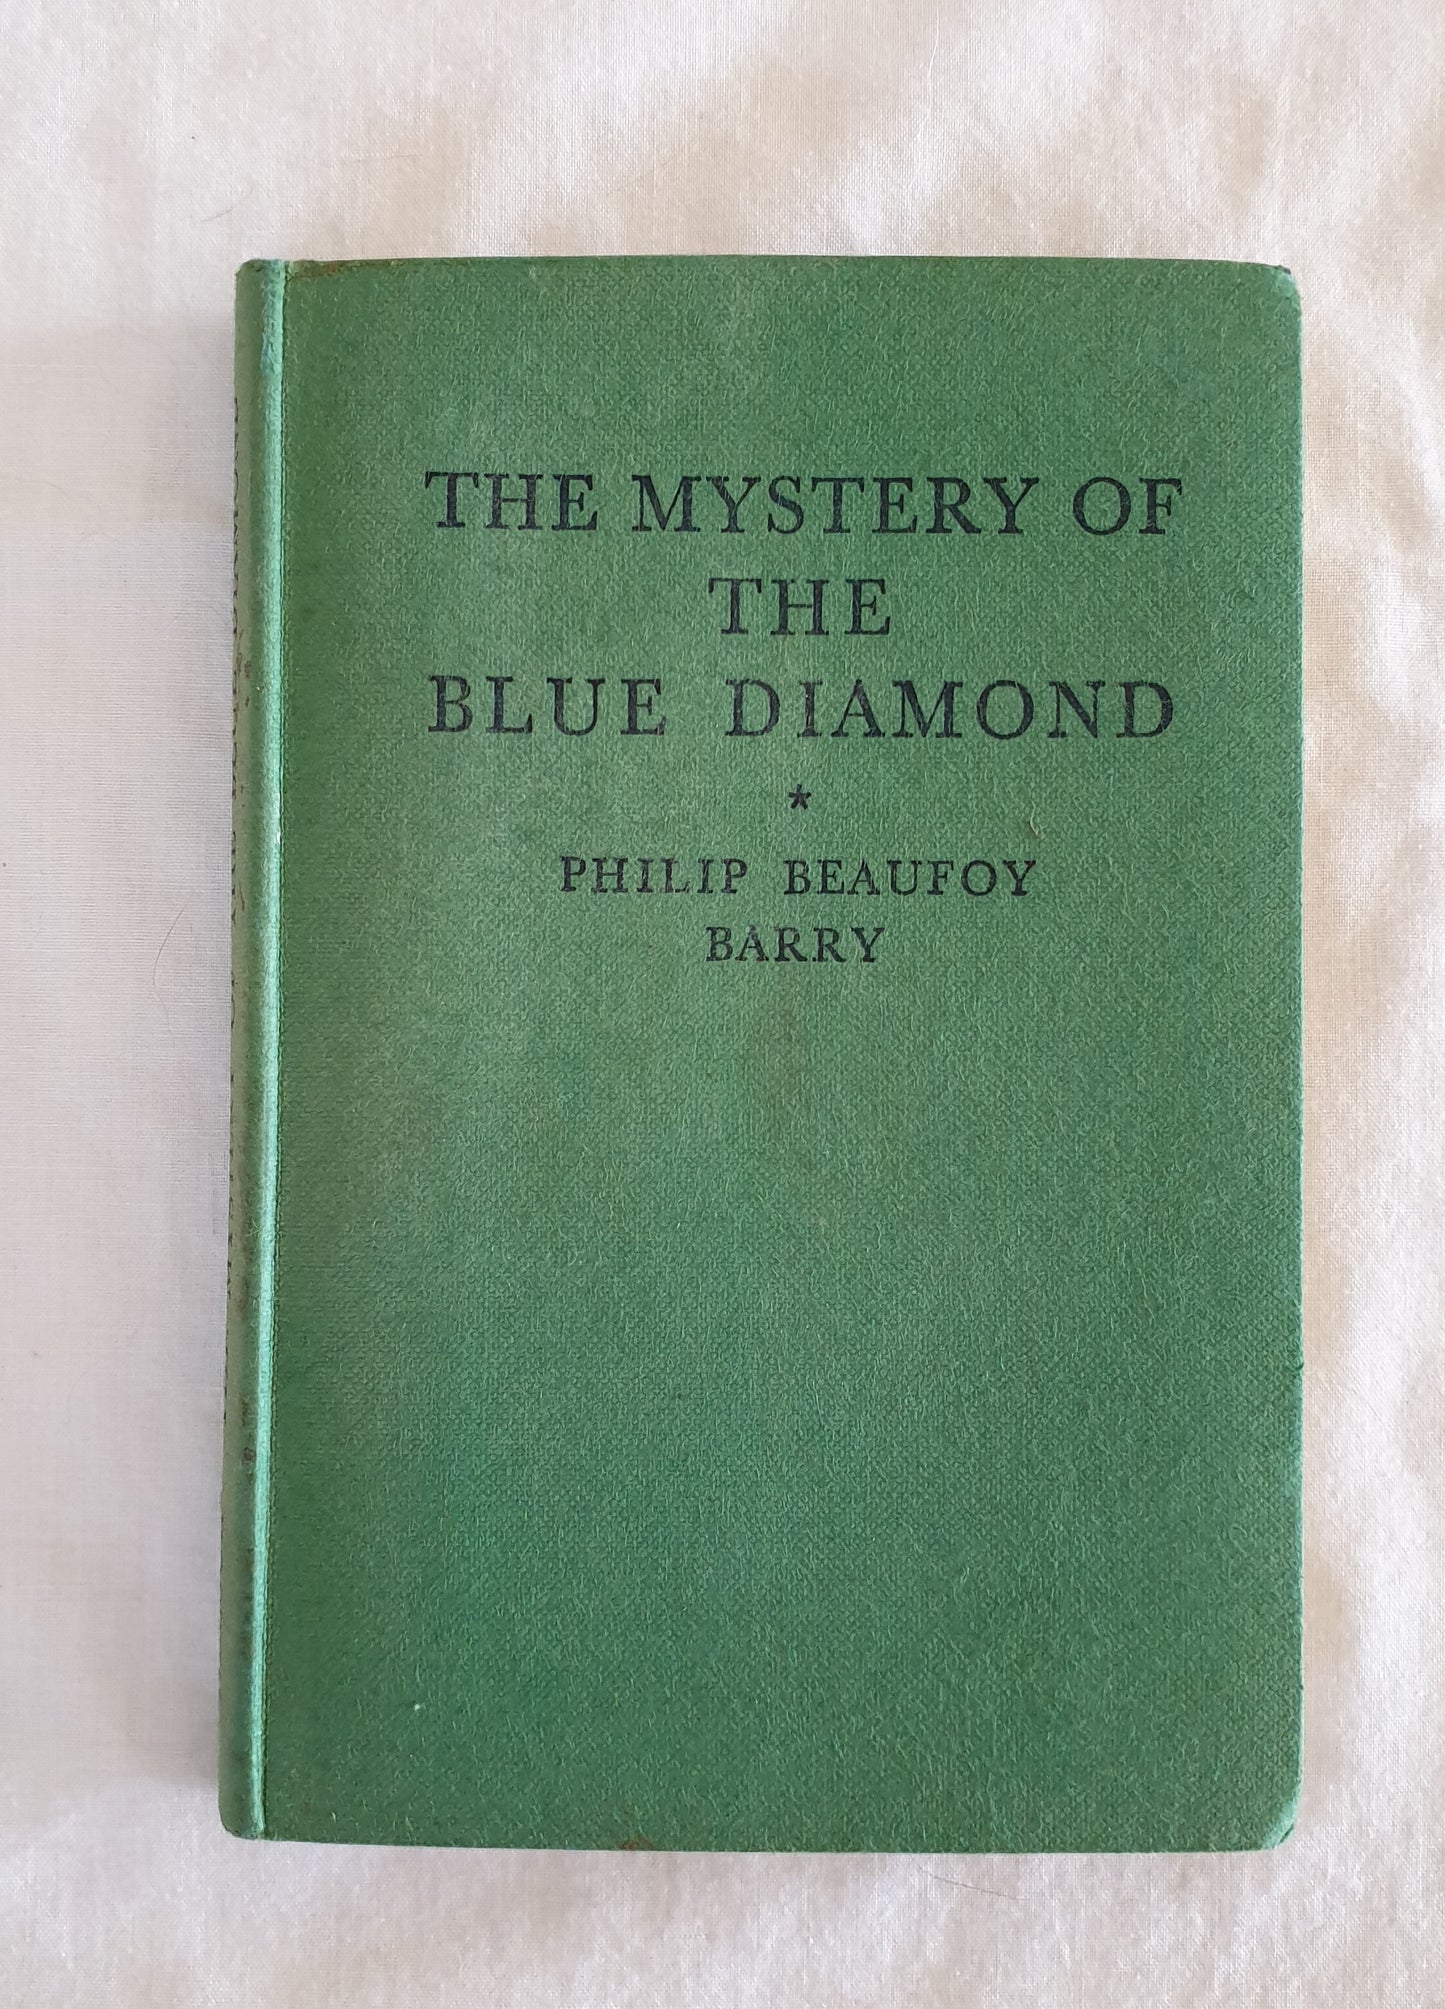 The Mystery of the Blue Diamond by Philip Beaufoy Barry